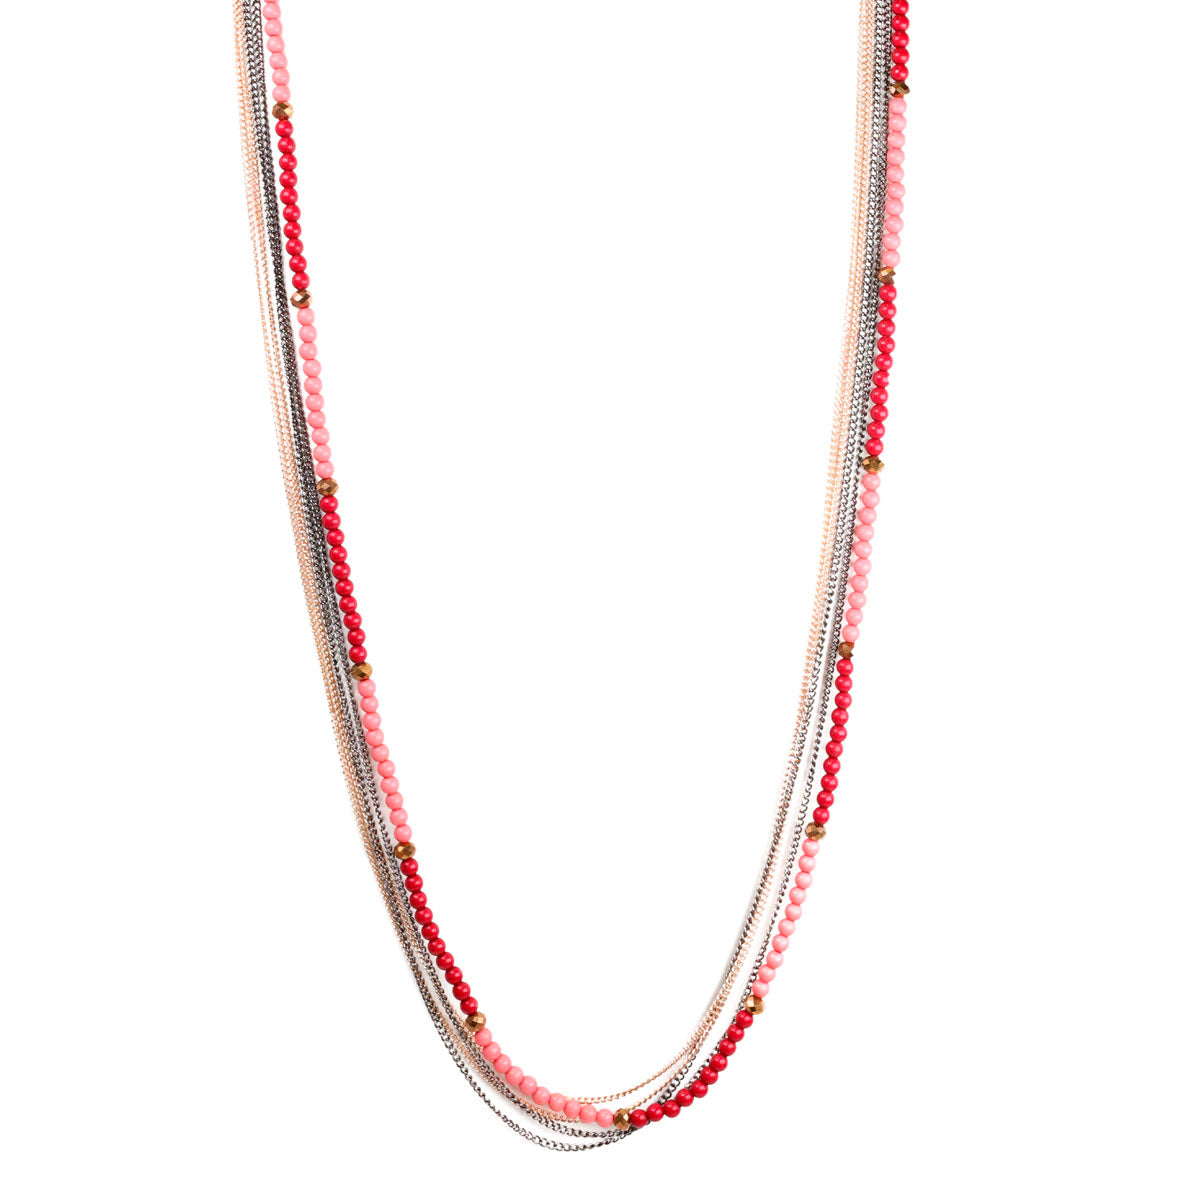 Long neck beads with chains 120cm